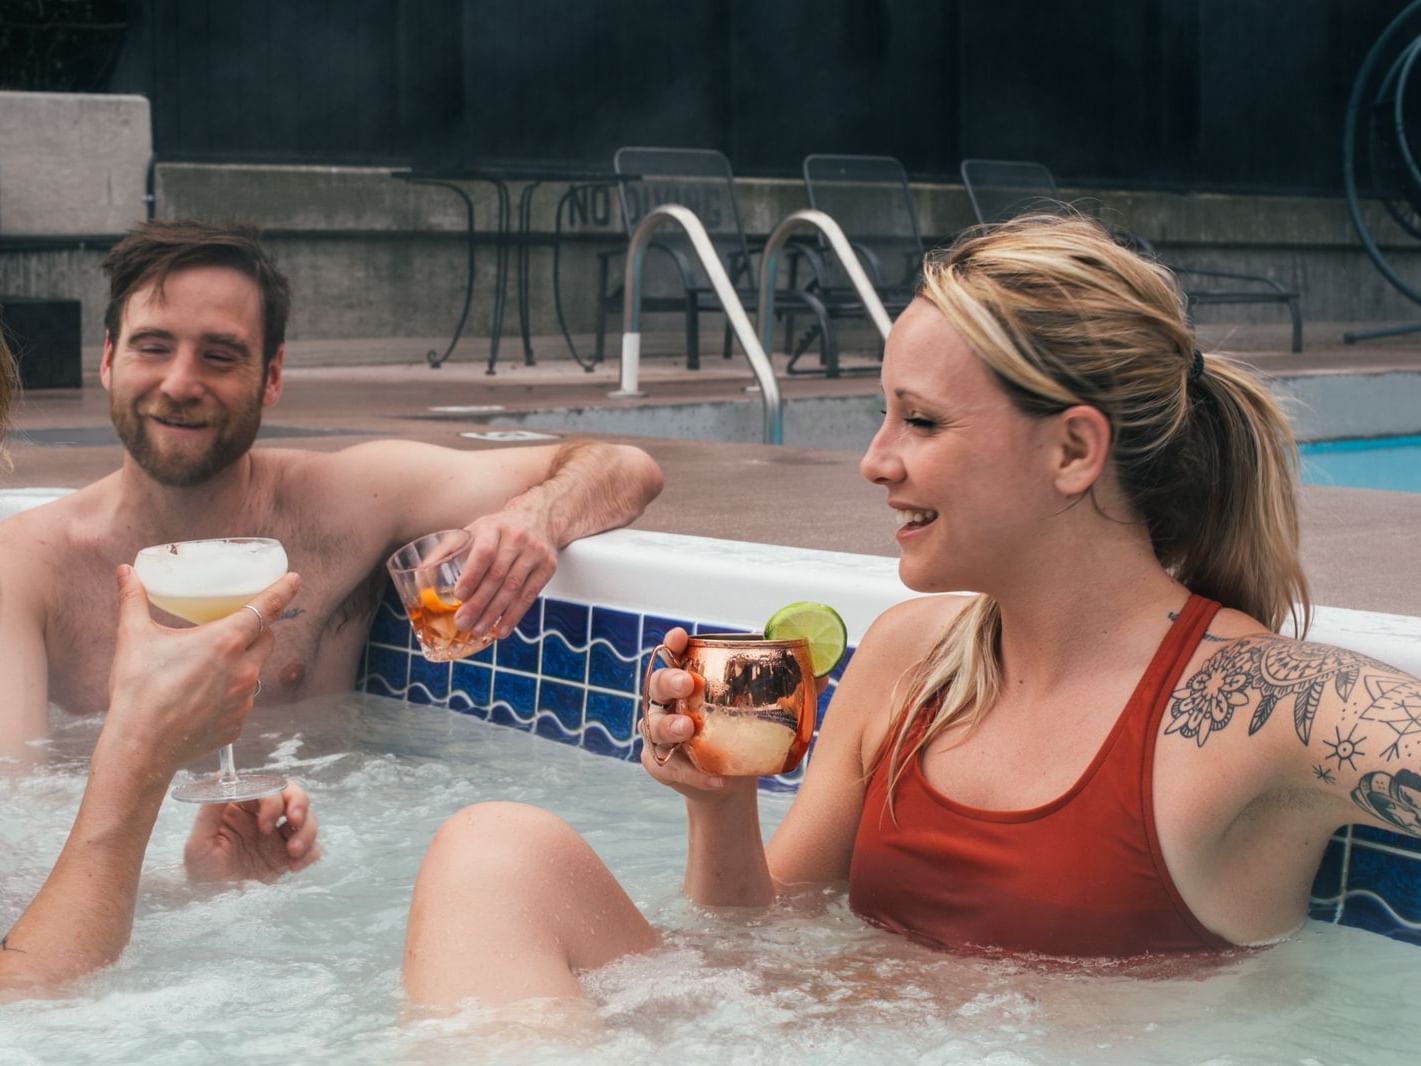 Friends in a hot tub enjoying cocktails.